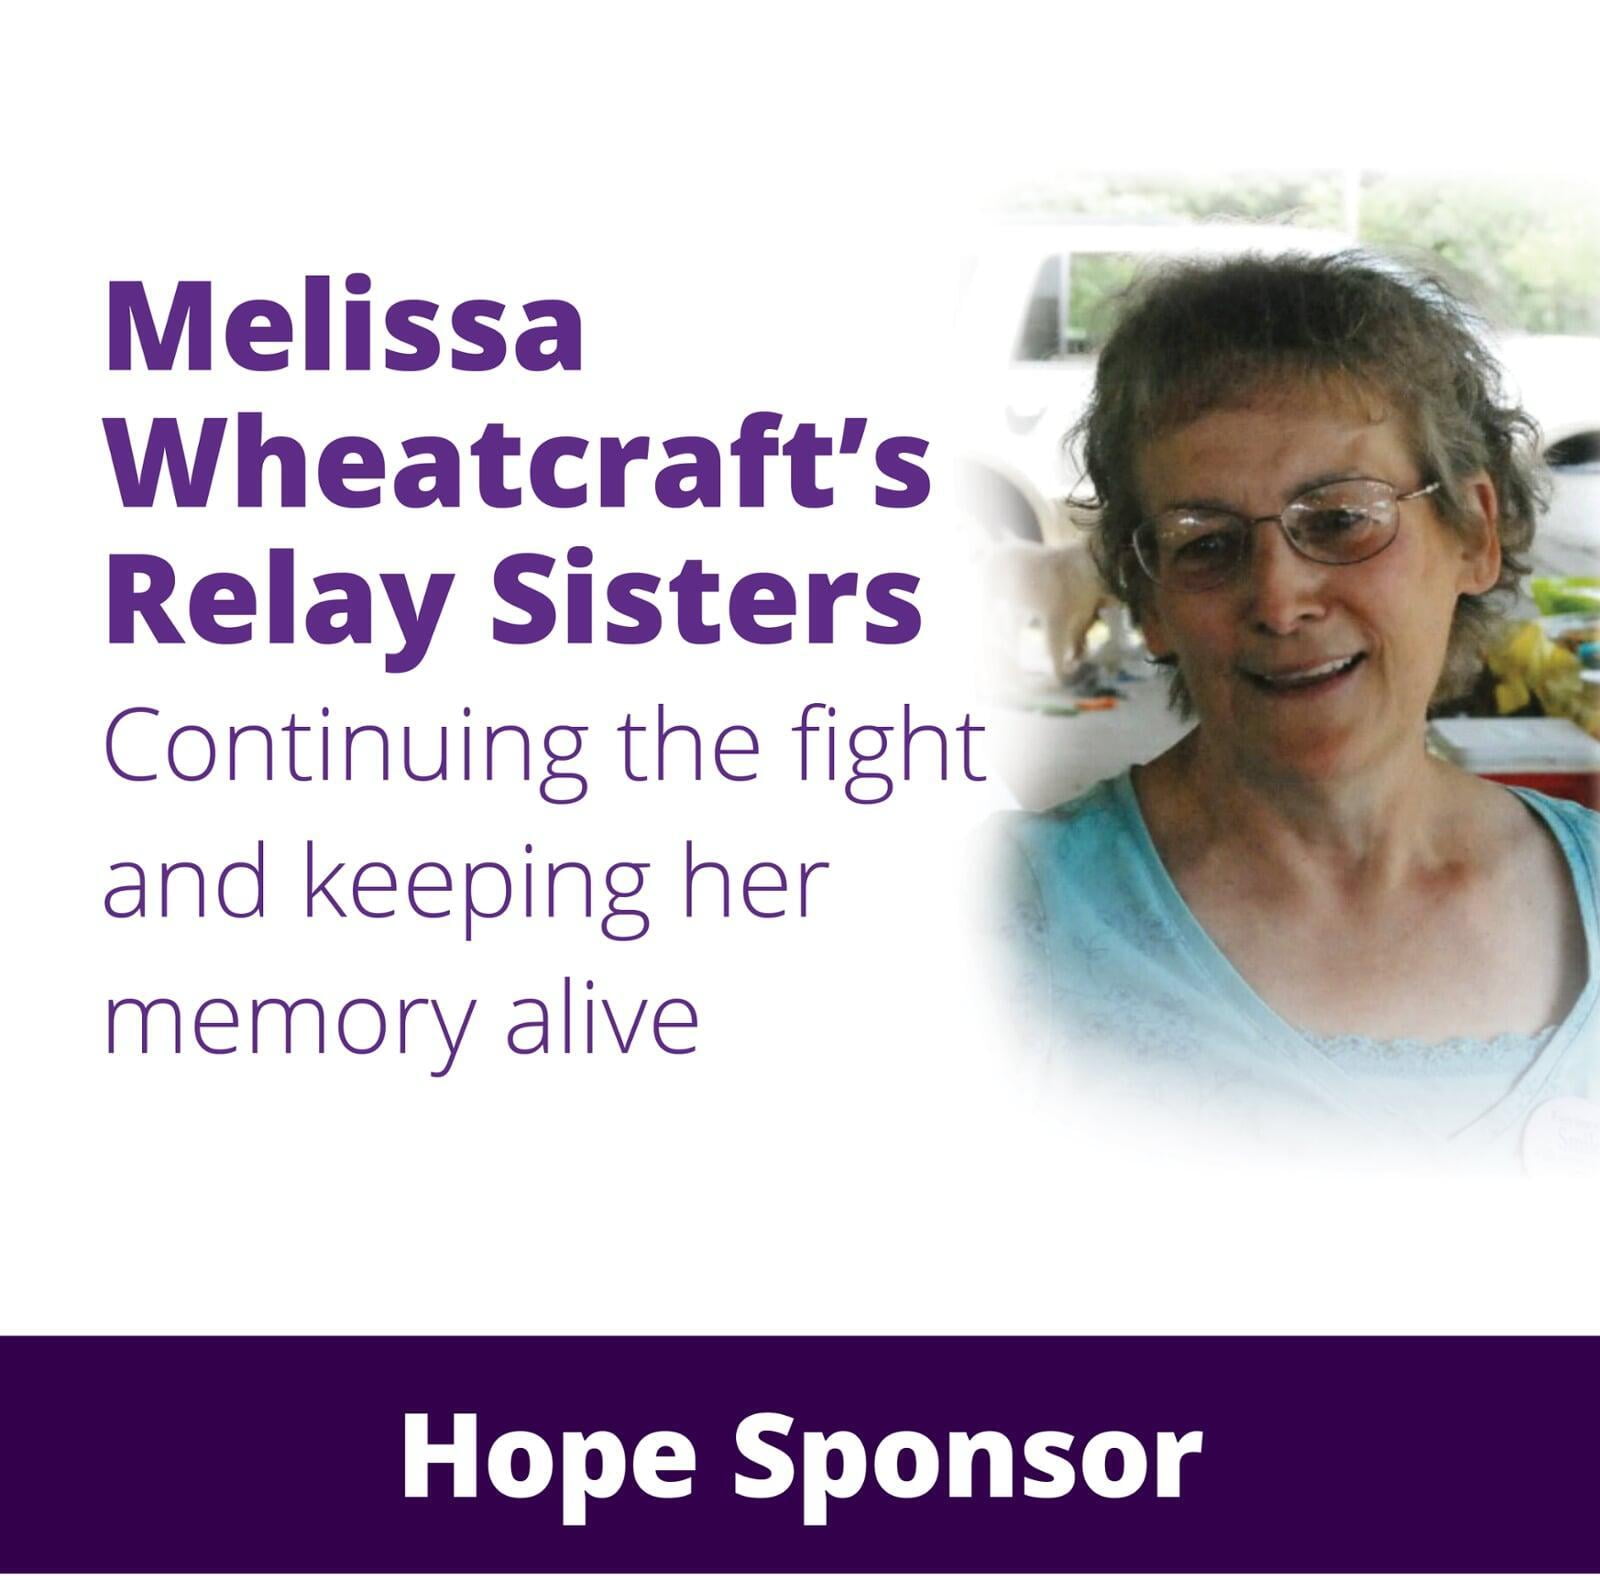 Melissa Wheatcraft's Relay Sisters with a photo of Melissa Wheatcraft